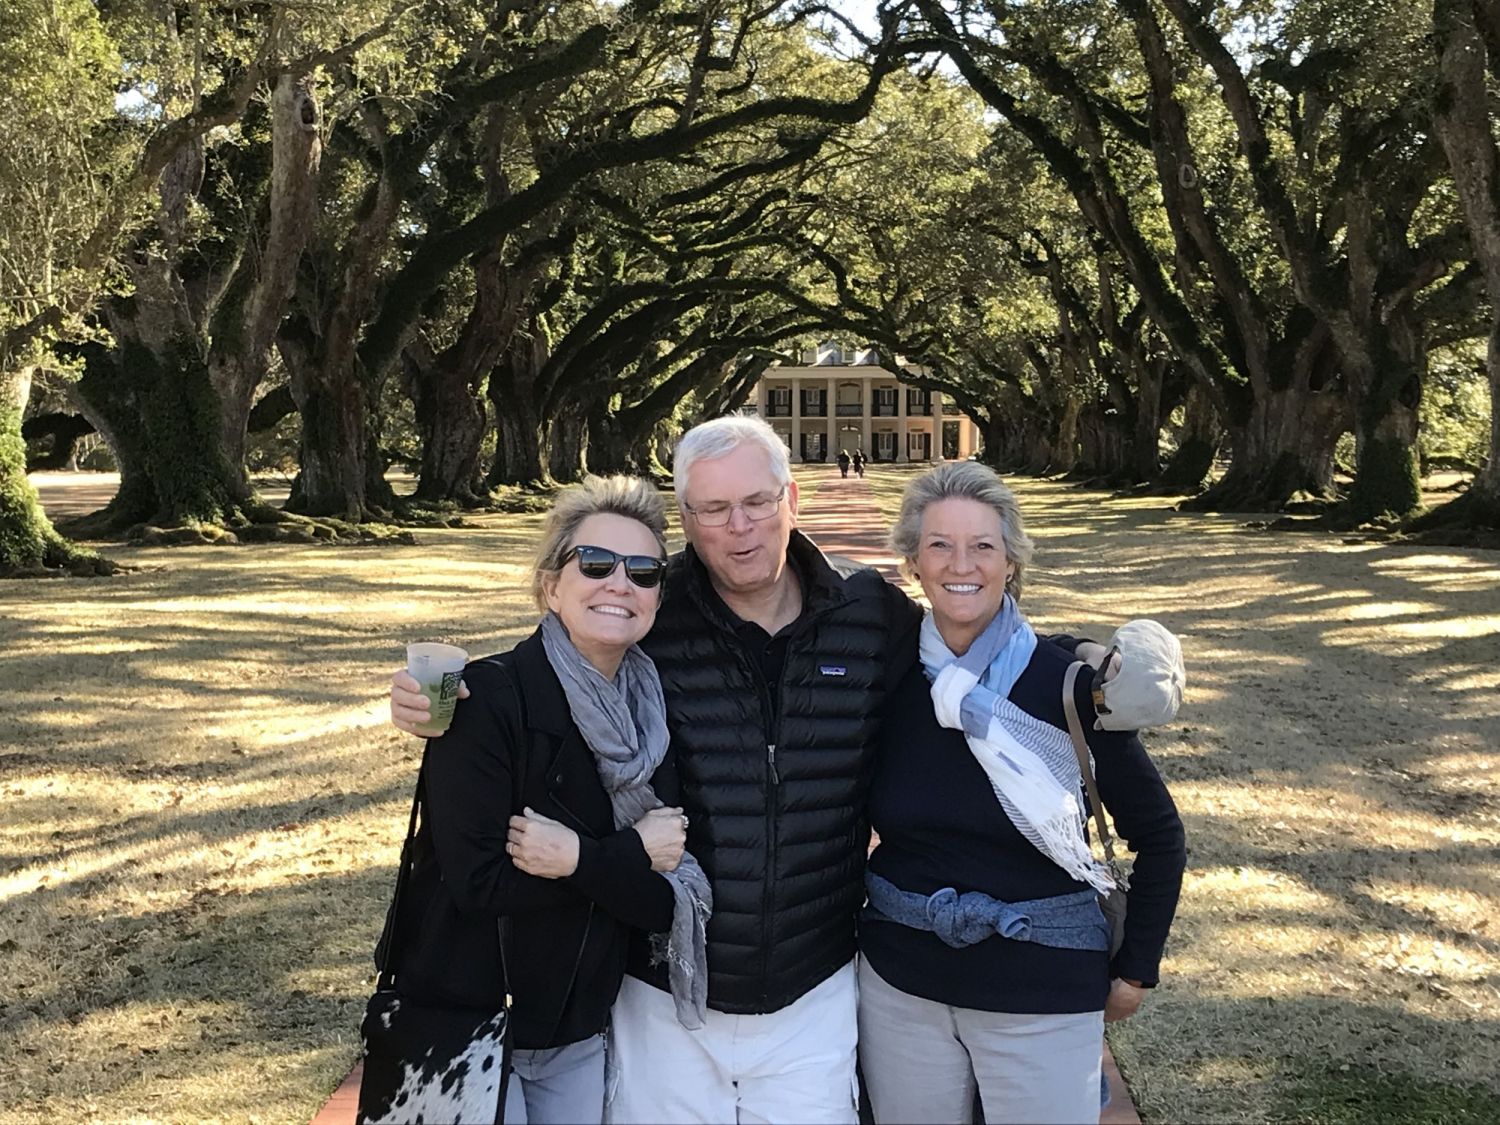 We got to catch up with Tom and Kathy and play tourists for a day or two!